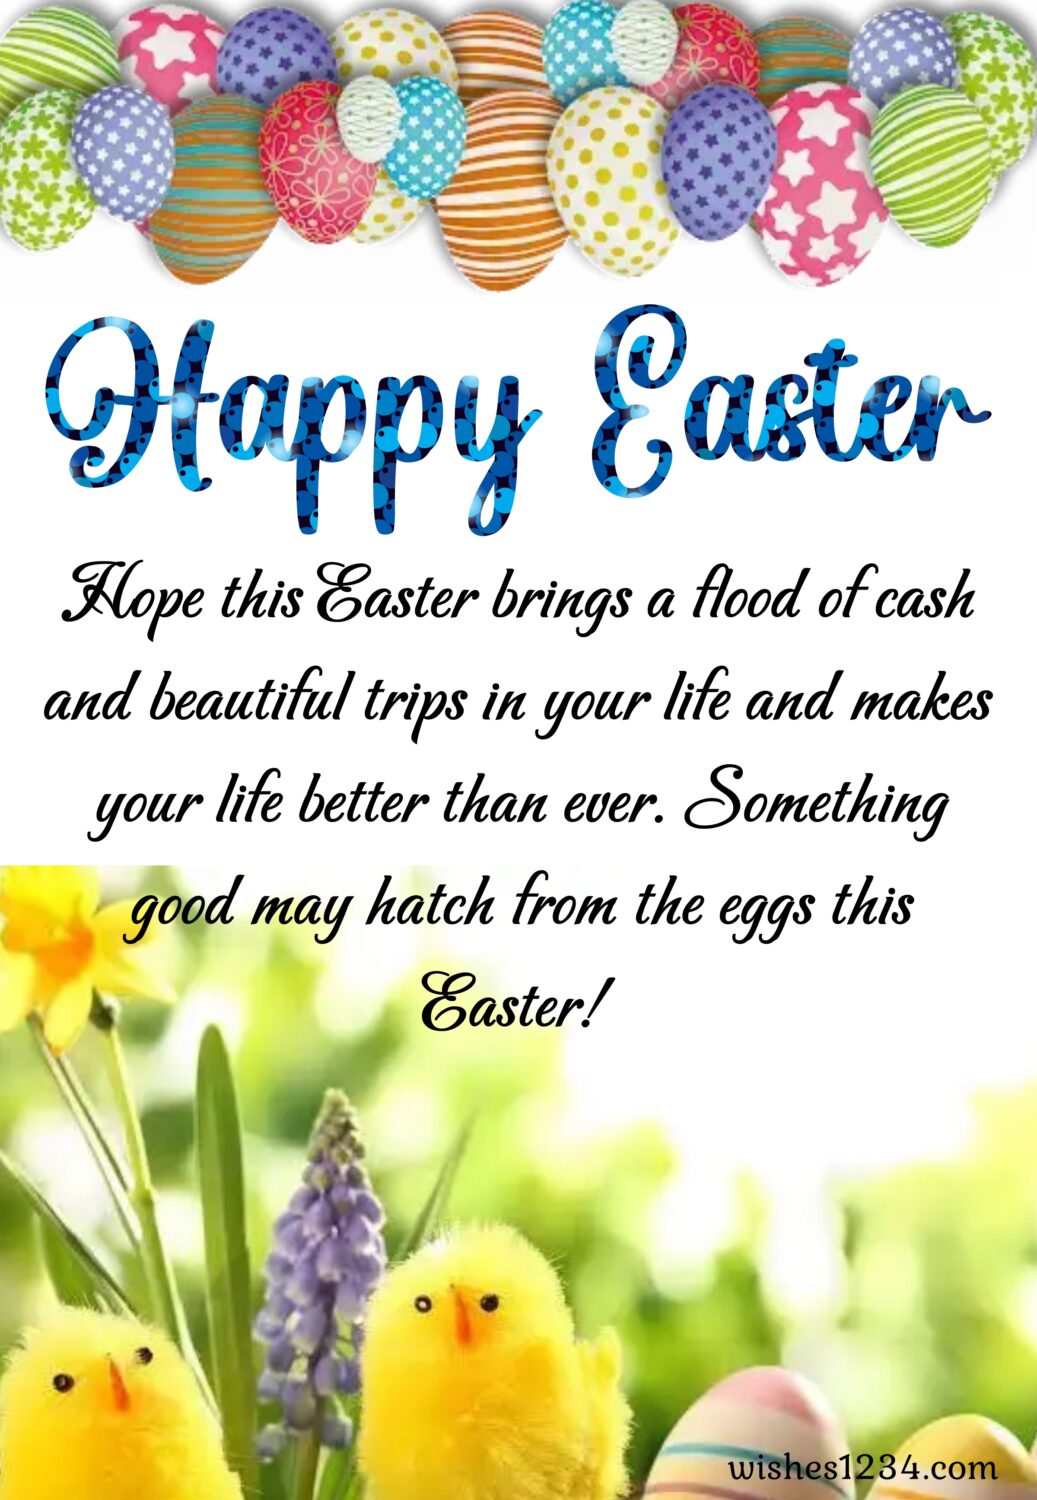 Easter eggs with two chicks, Happy Easter Wishes, Quotes & Images.